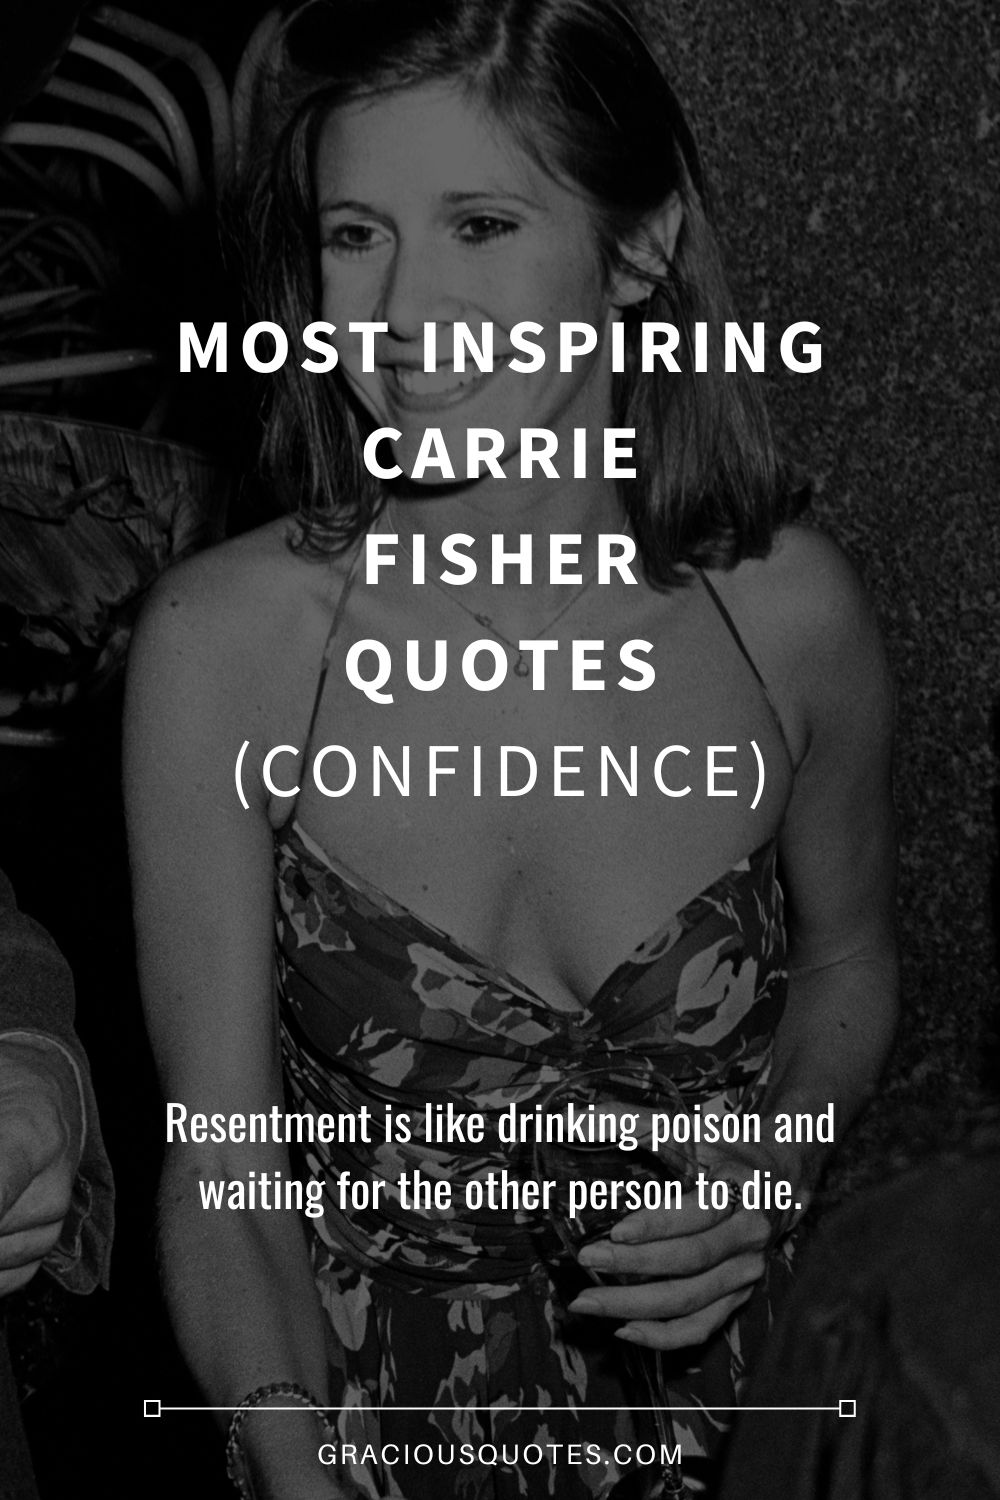 Most Inspiring Carrie Fisher Quotes (CONFIDENCE) - Gracious Quotes